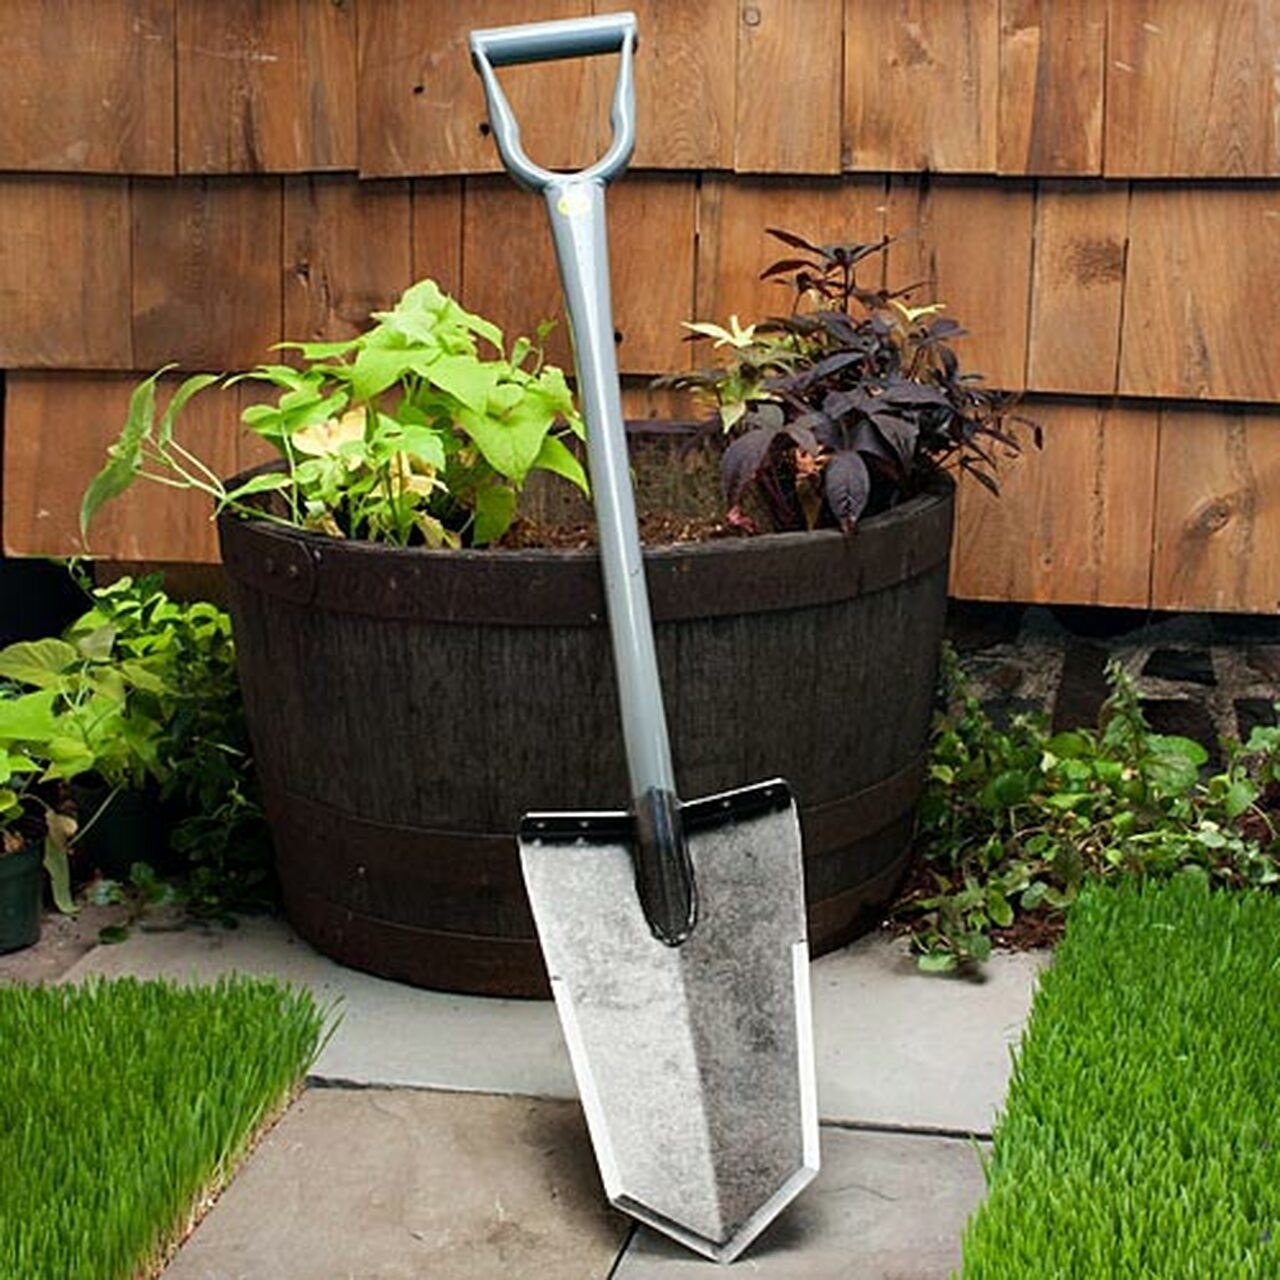 the all-steel shovel leaning against an outdoor planter